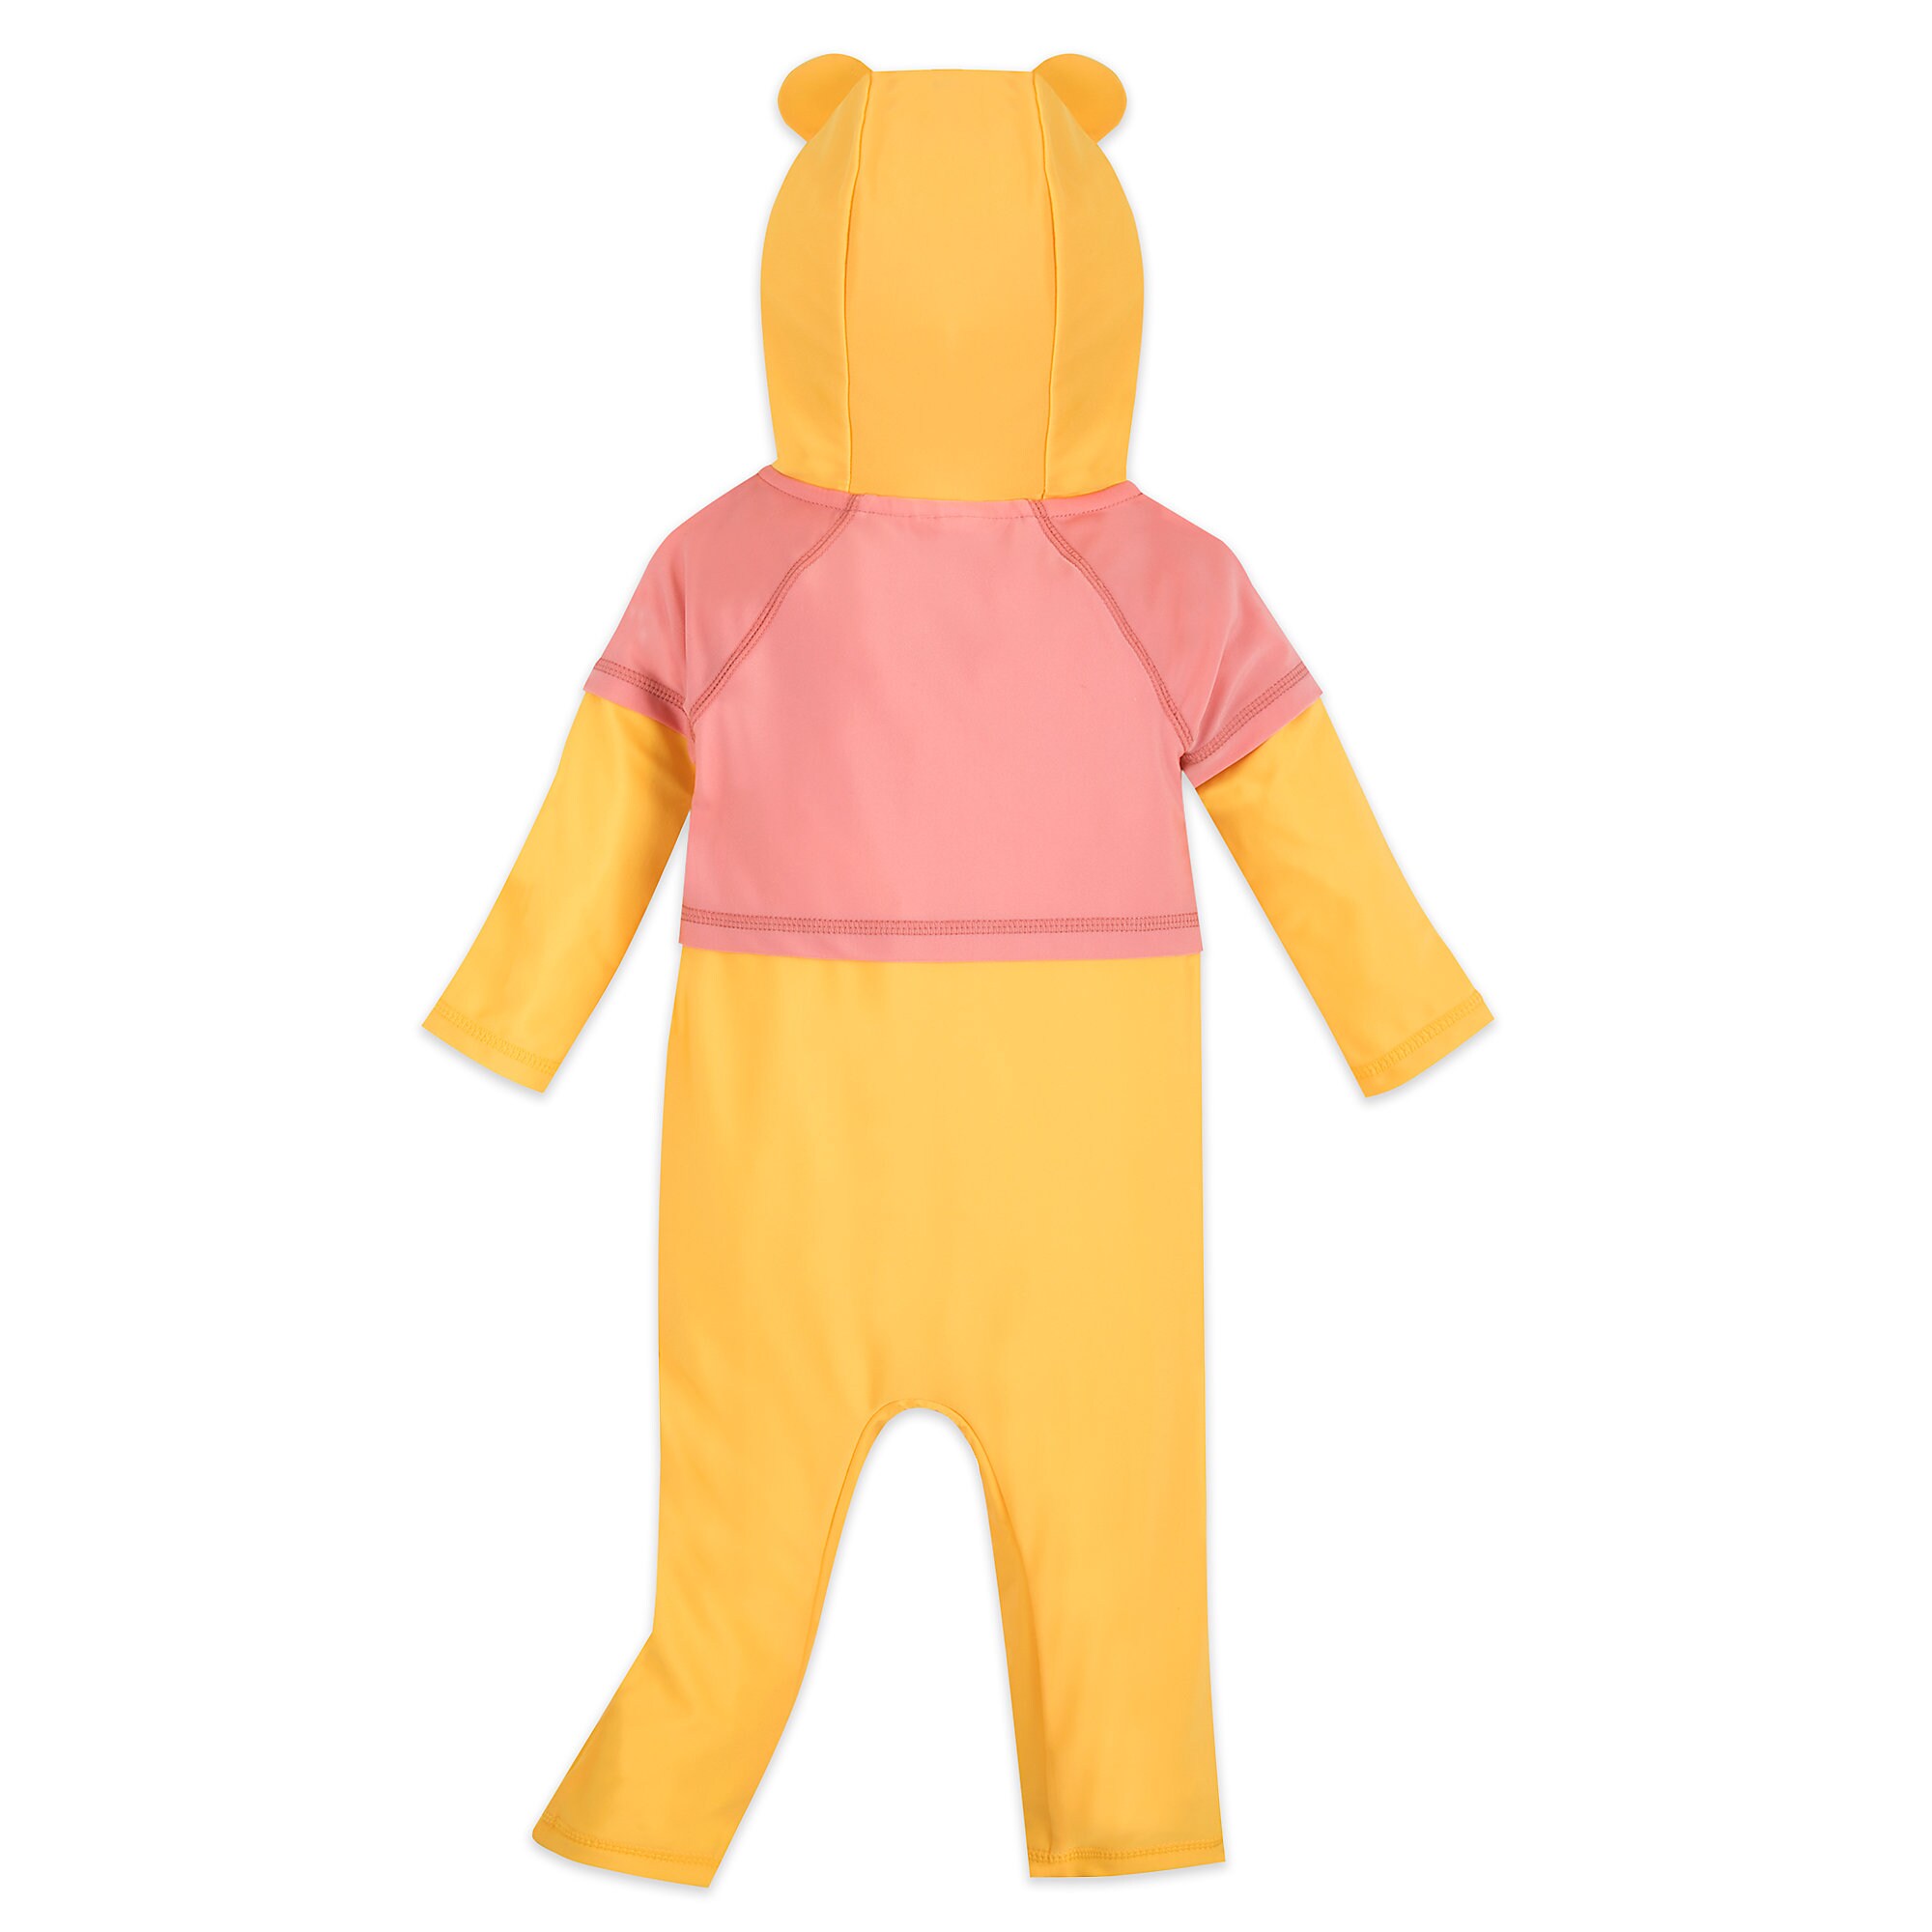 Winnie the Pooh Hooded Wetsuit for Baby